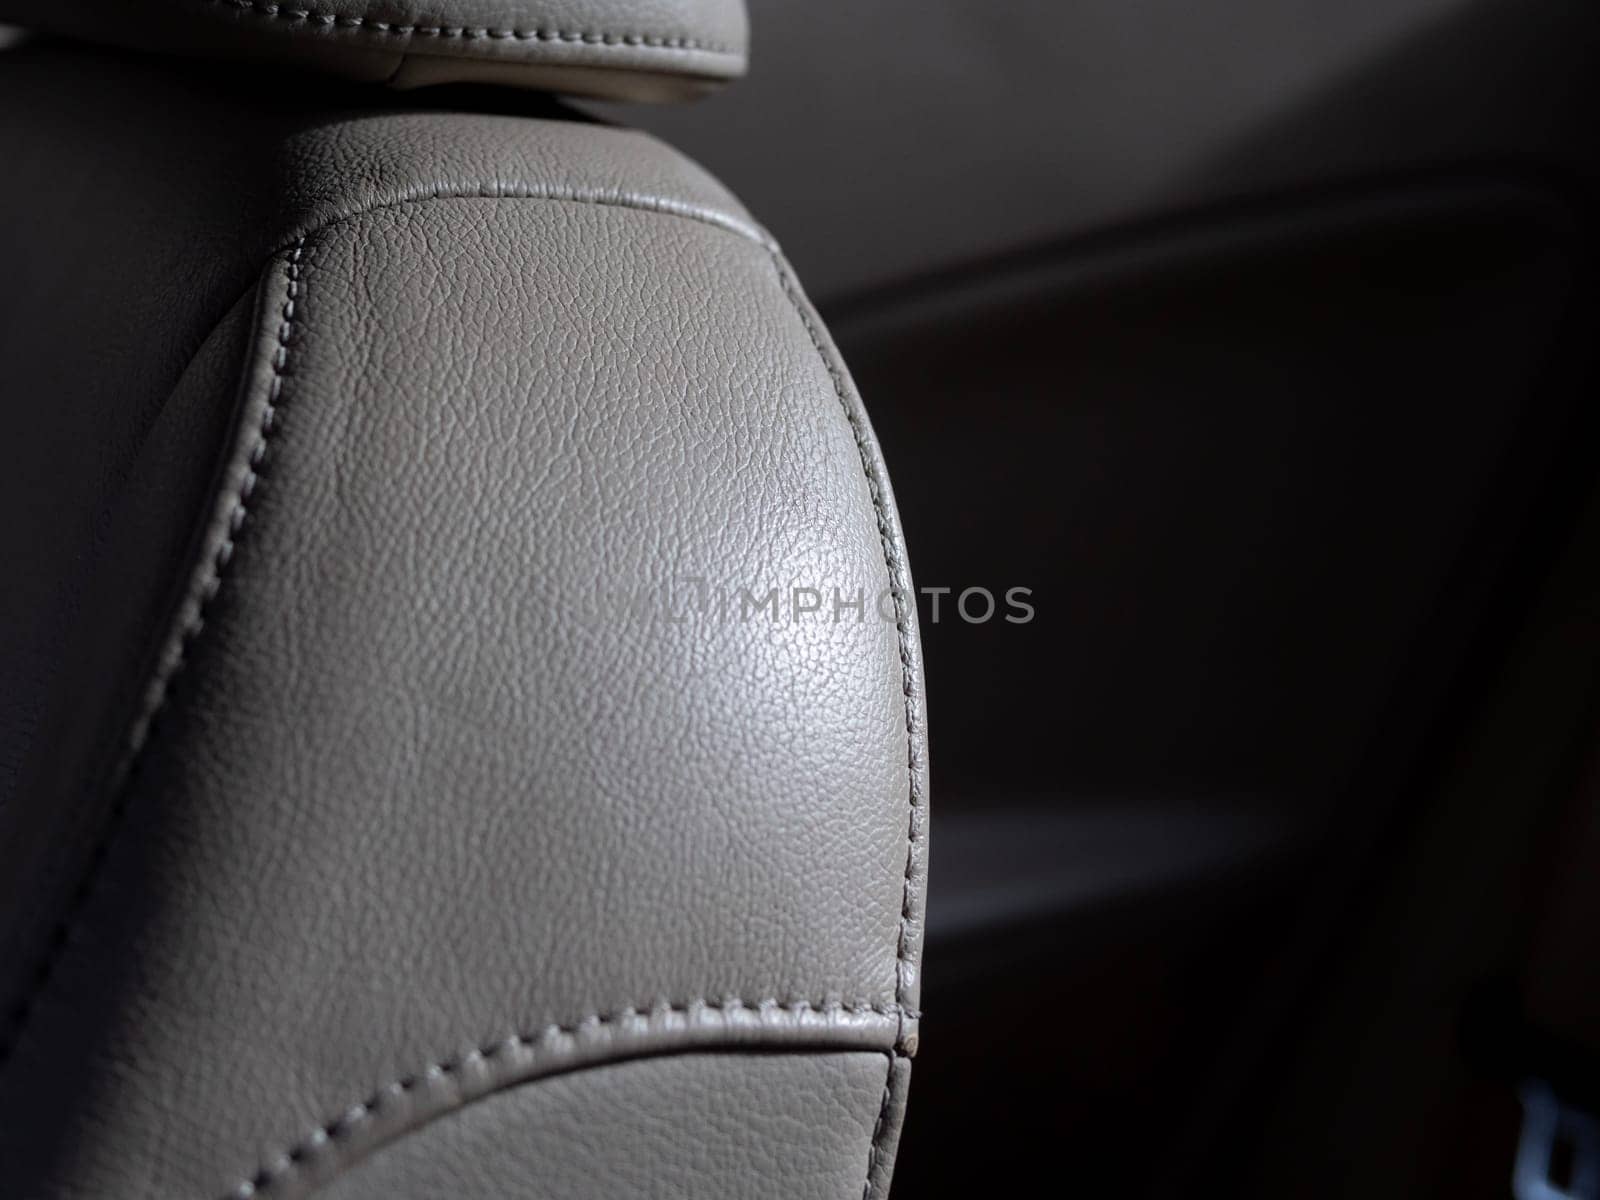 Part of leather car seat details by jackreznor